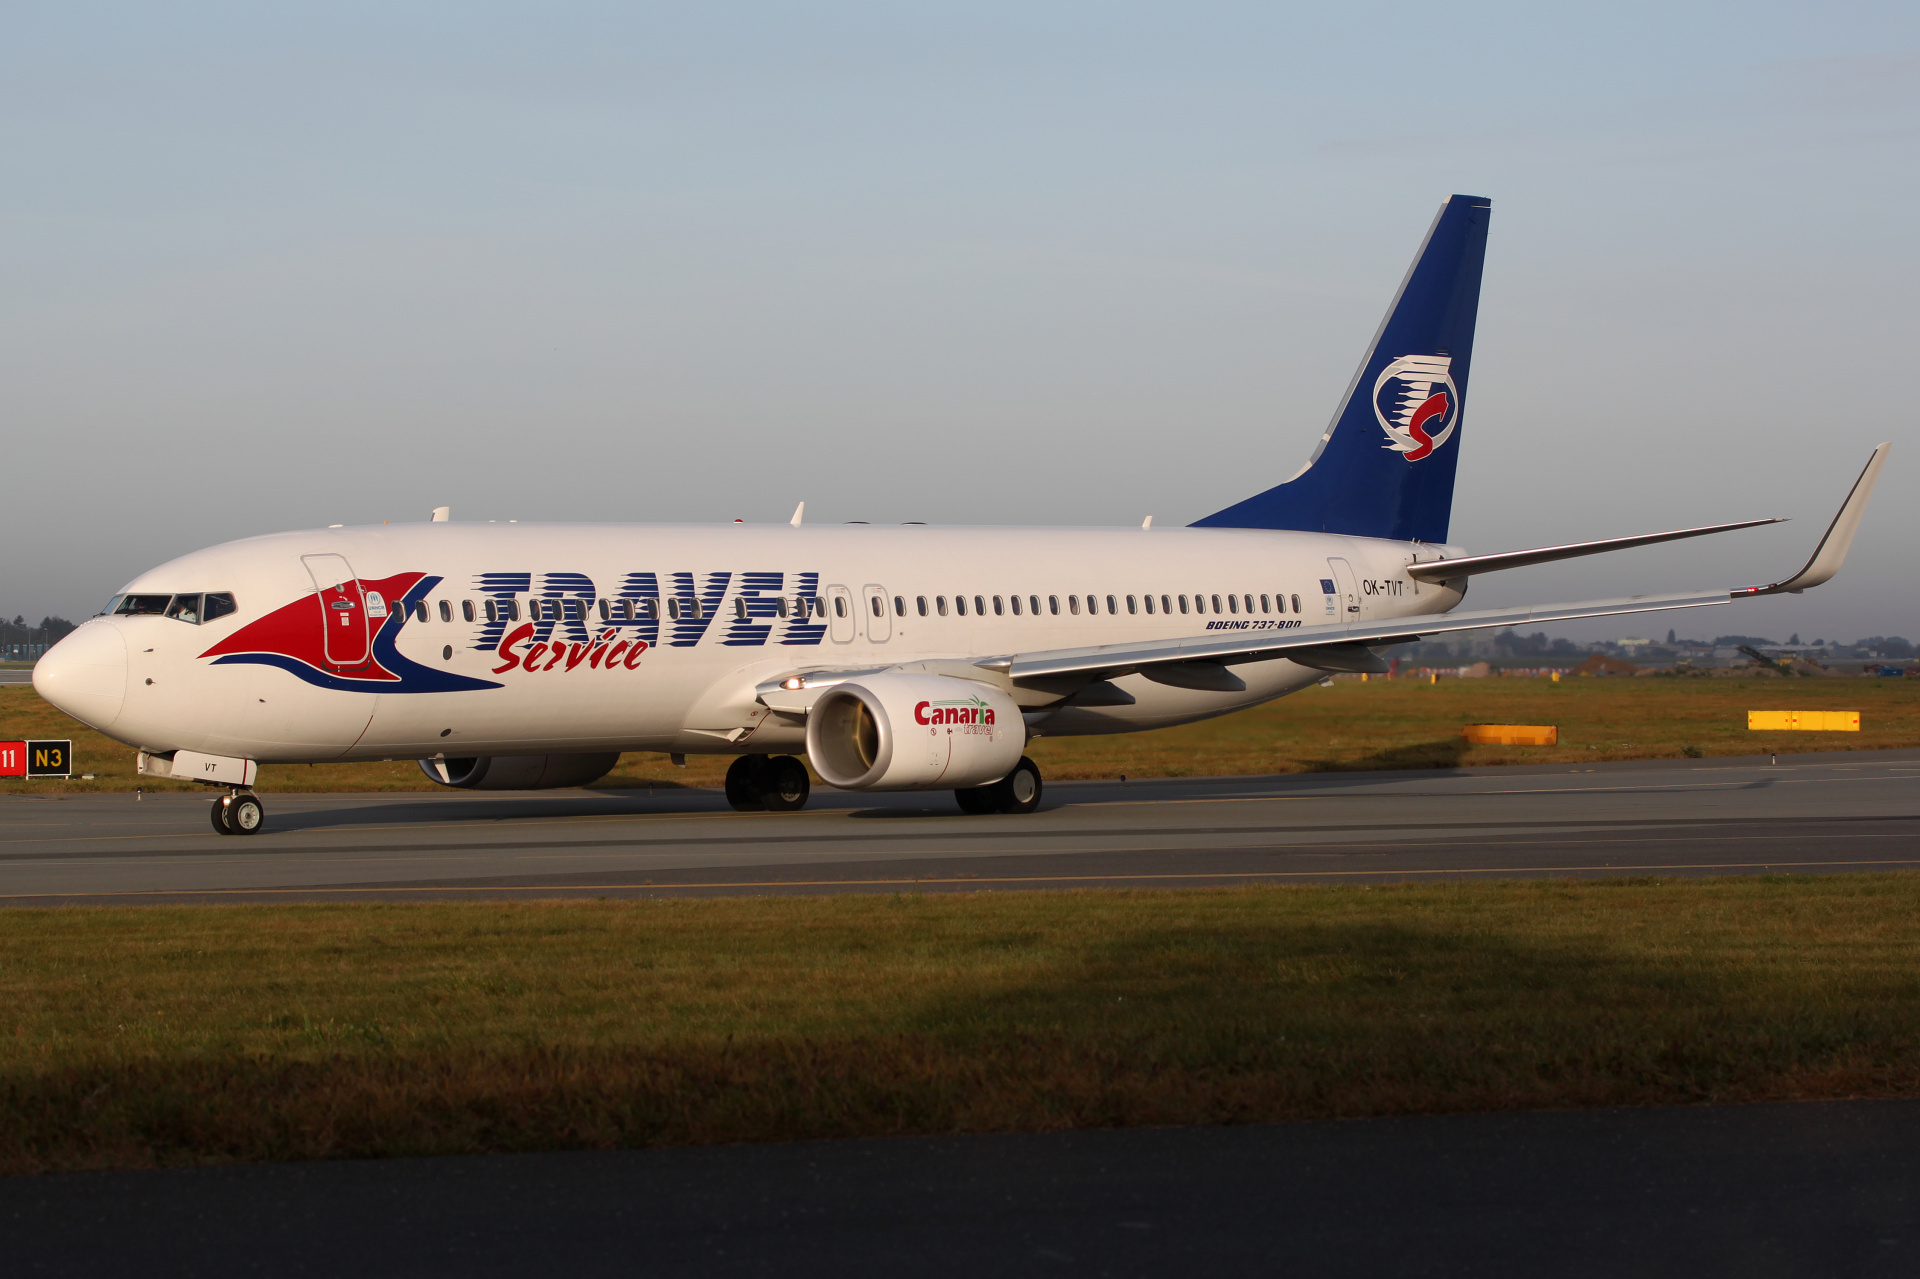 OK-TVT (Aircraft » EPWA Spotting » Boeing 737-800 » Travel Service Airlines)